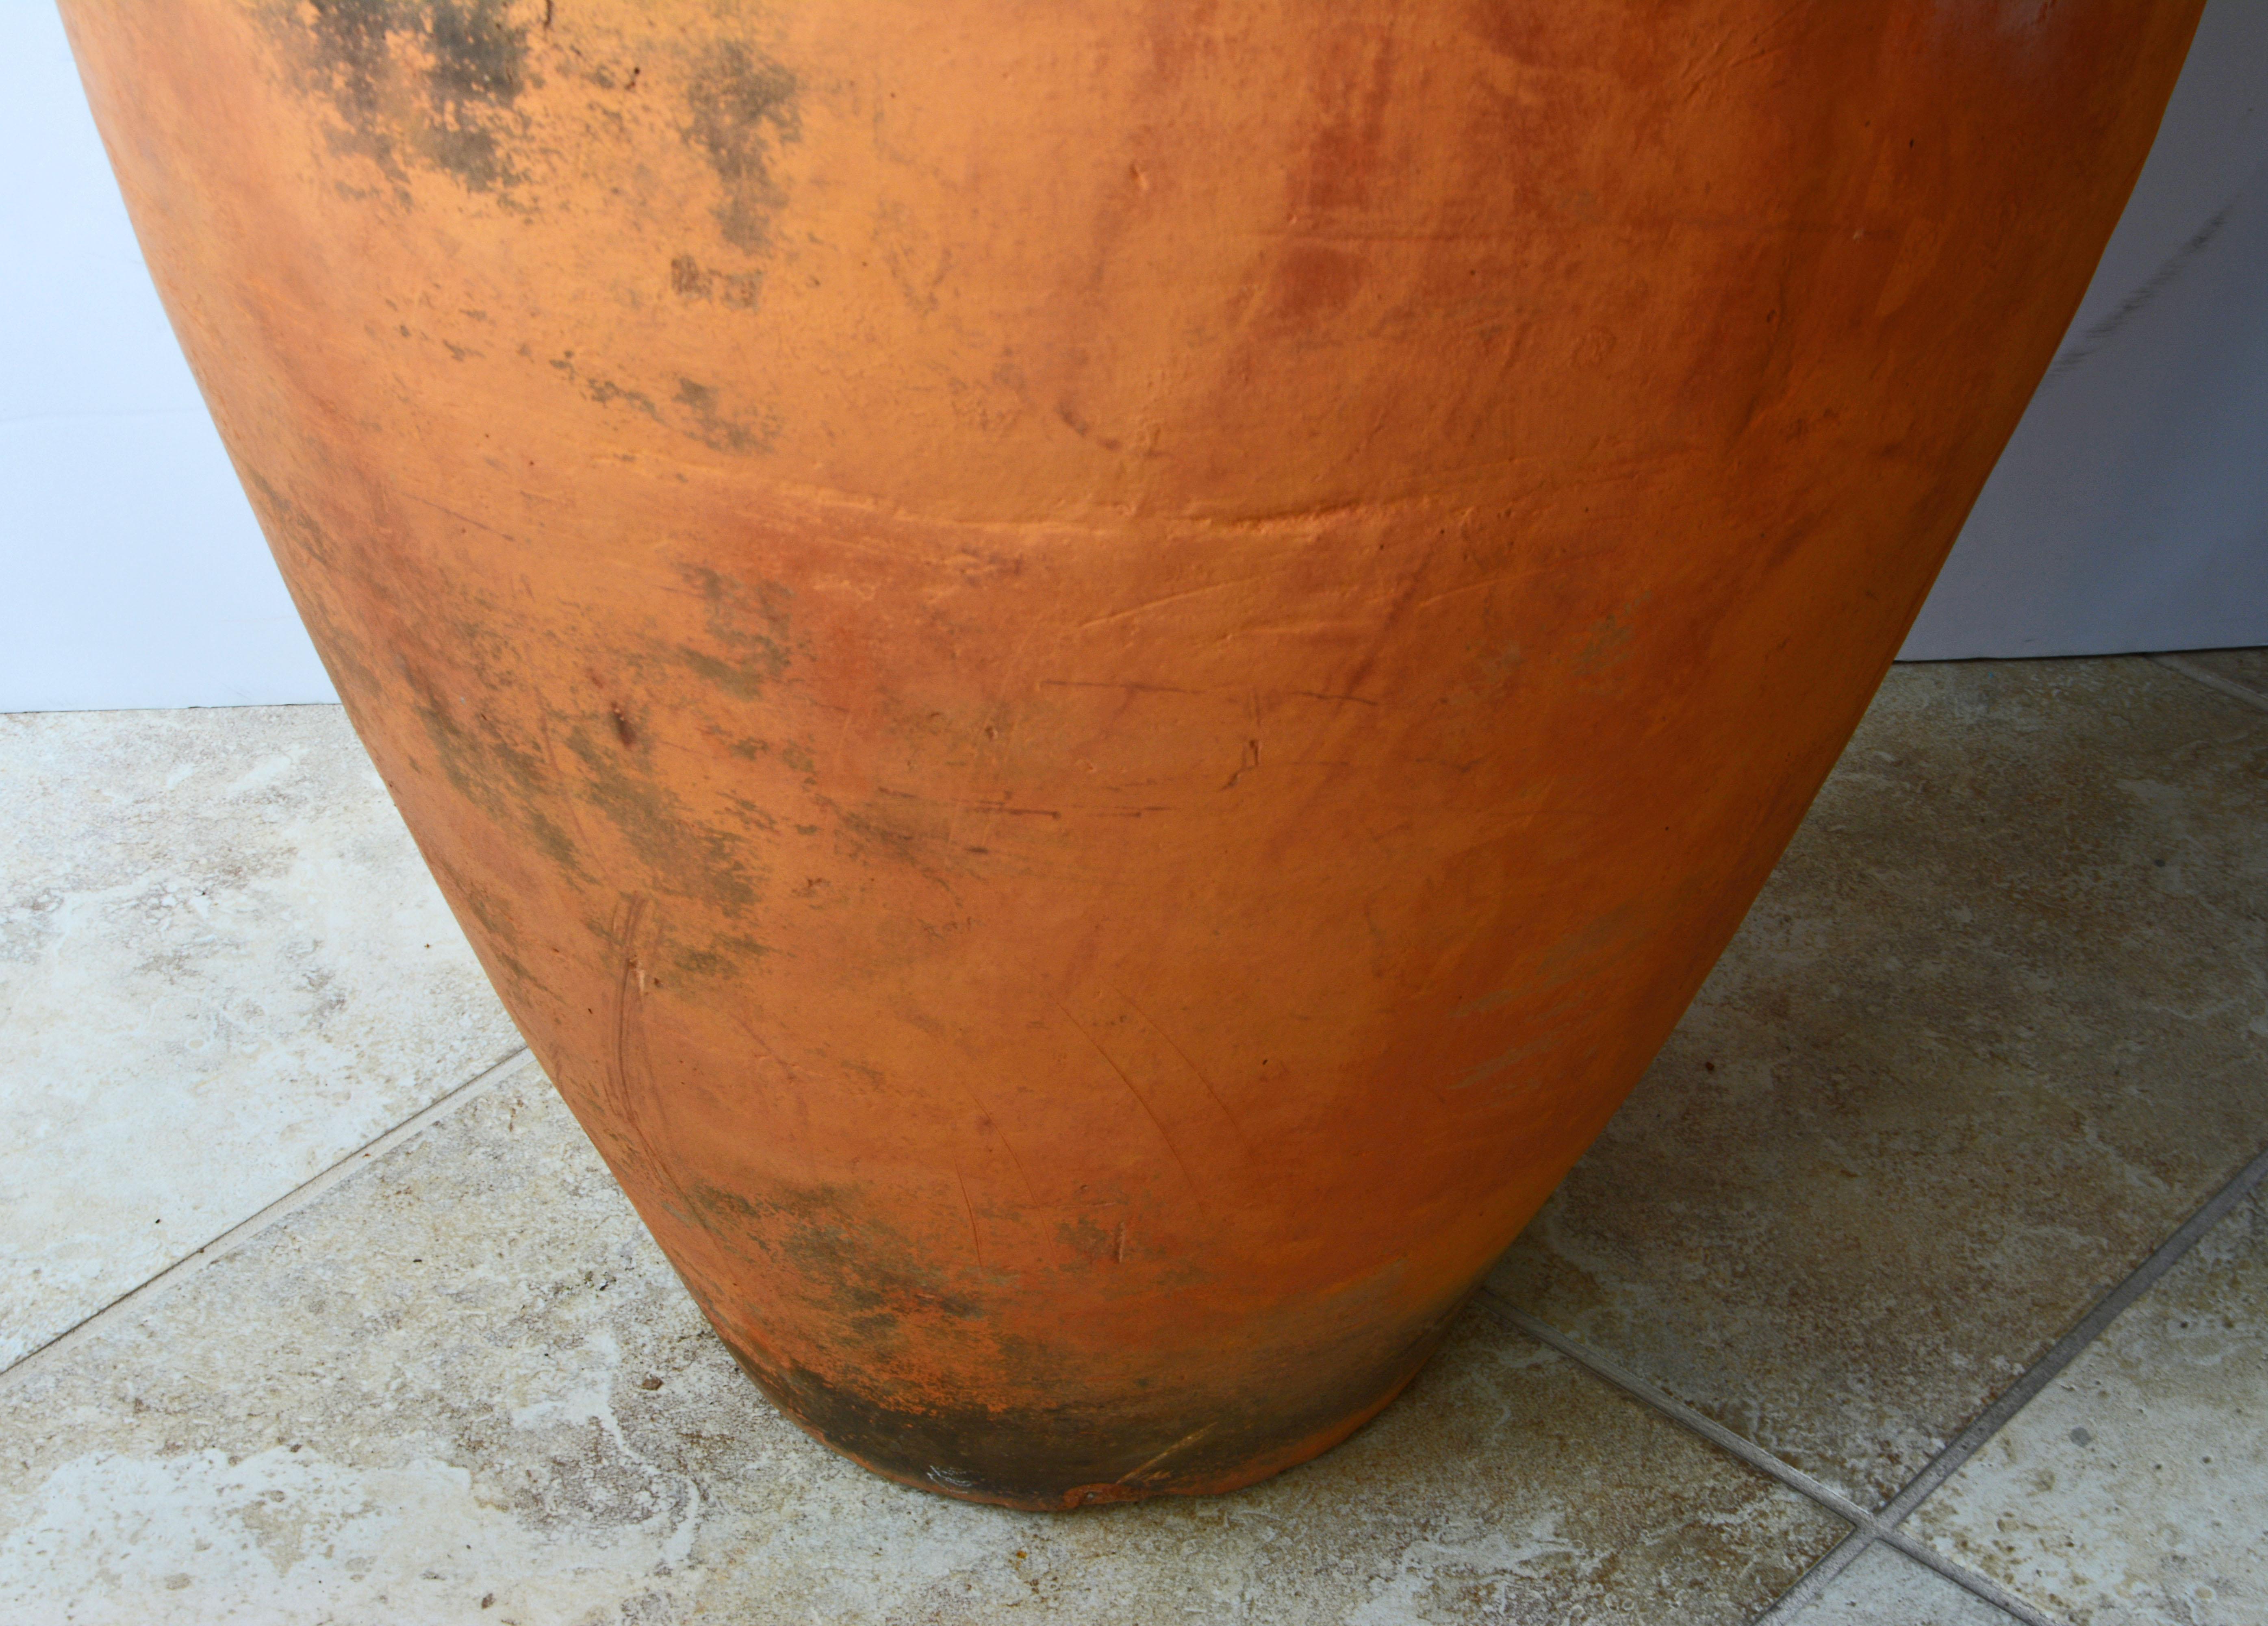 Standing more than 44 inches tall this vintage terracotta olive jar will make a great impression indoors as well as outdoors. Of classic form It features a wide flared mouth and two sculpted handles.